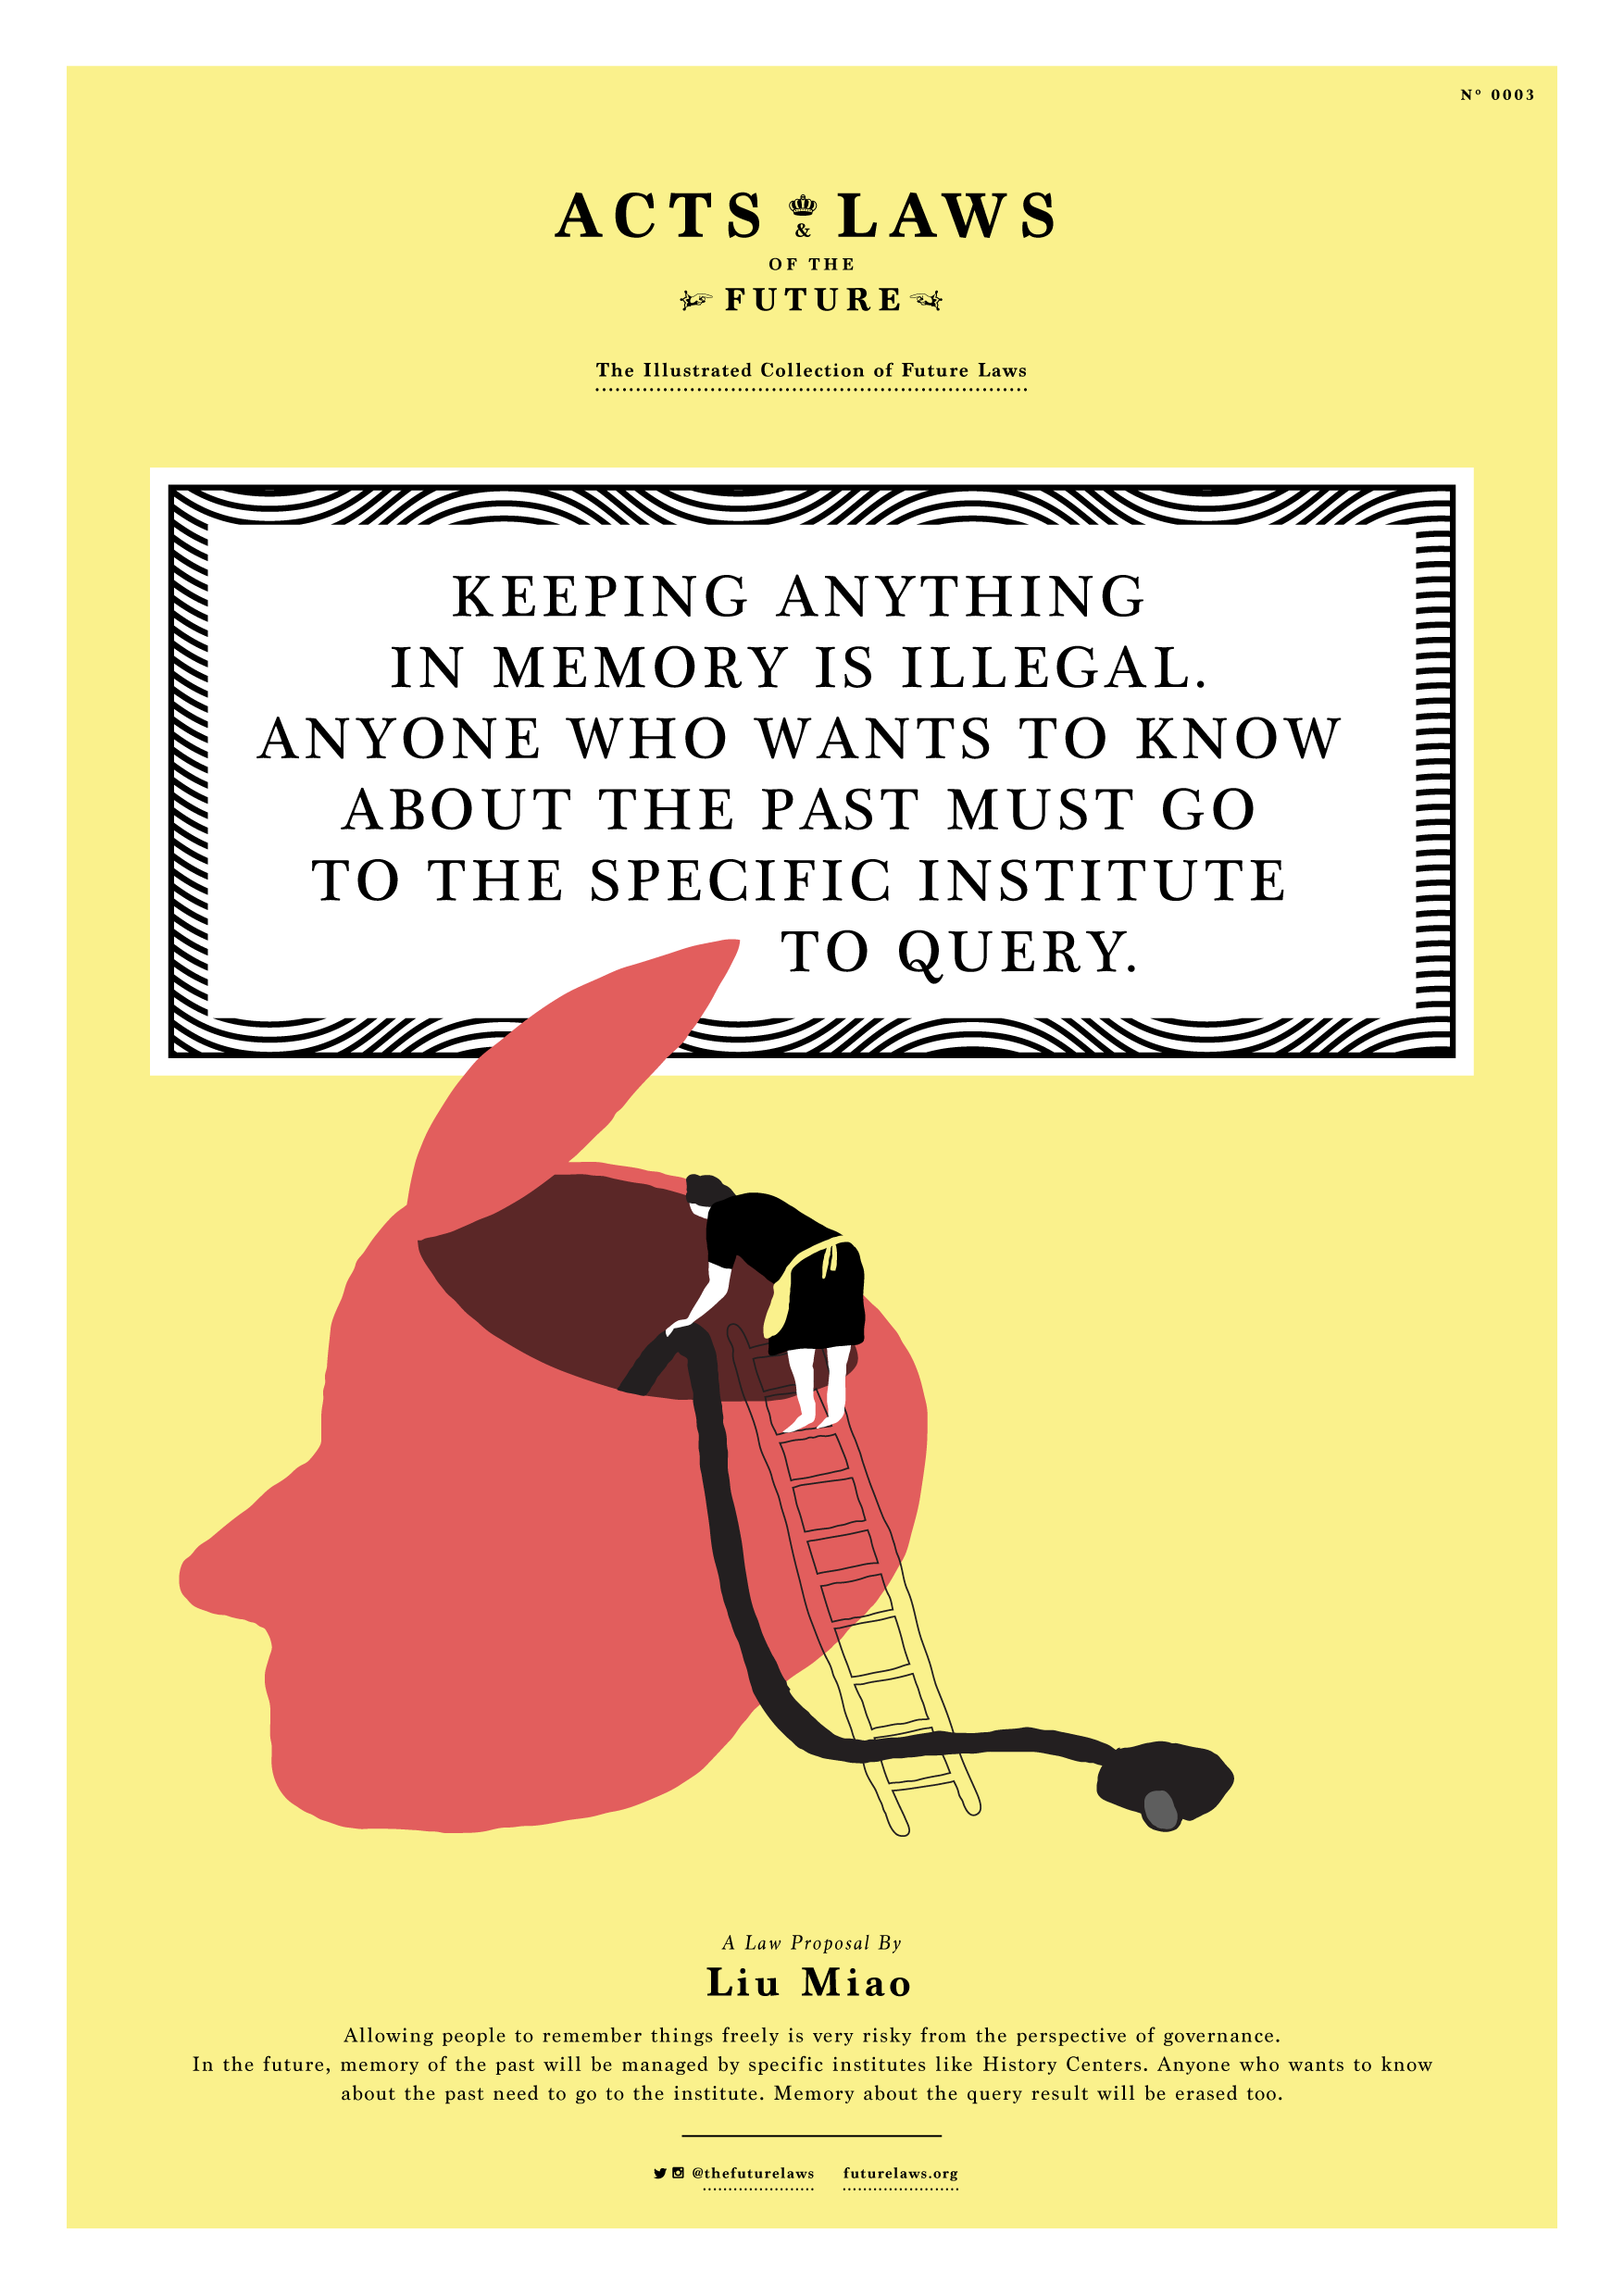 Keeping anything in memory is illegal. Anyone who wants to know about the past must go to the specific institute to query.